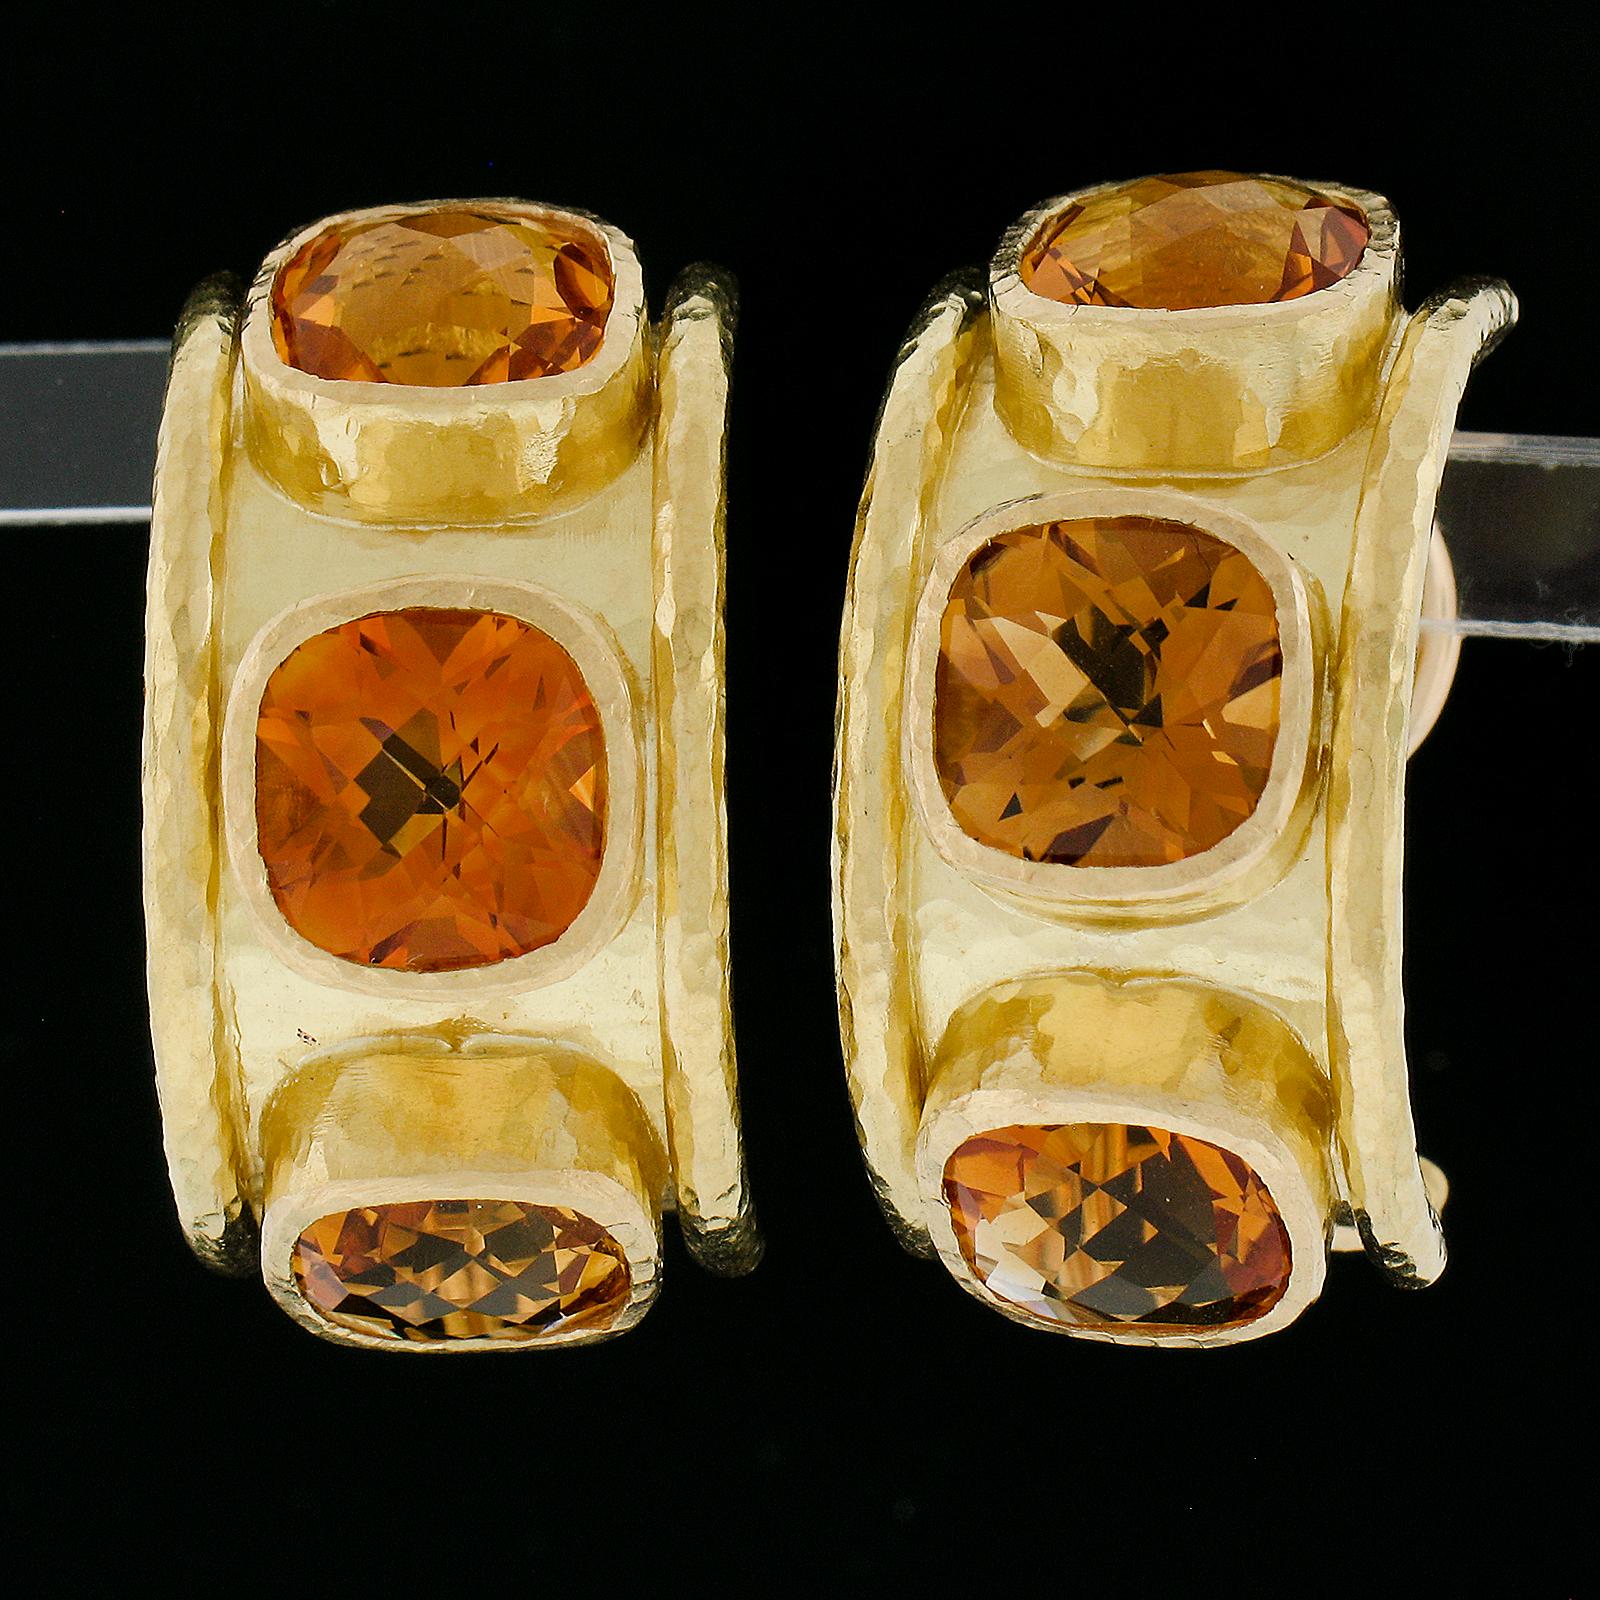 --Stone(s):--
(6) Natural Genuine Citrine - Cushion Cabochon Cut - Bezel Set - Deep Orange Color - 7.8x7.4mm each (approx.)
Backing:	Clip On or Swivel Posts w/ Omega Closures (Pierced ears are NOT required.)

Material: All Solid 19k Yellow Gold